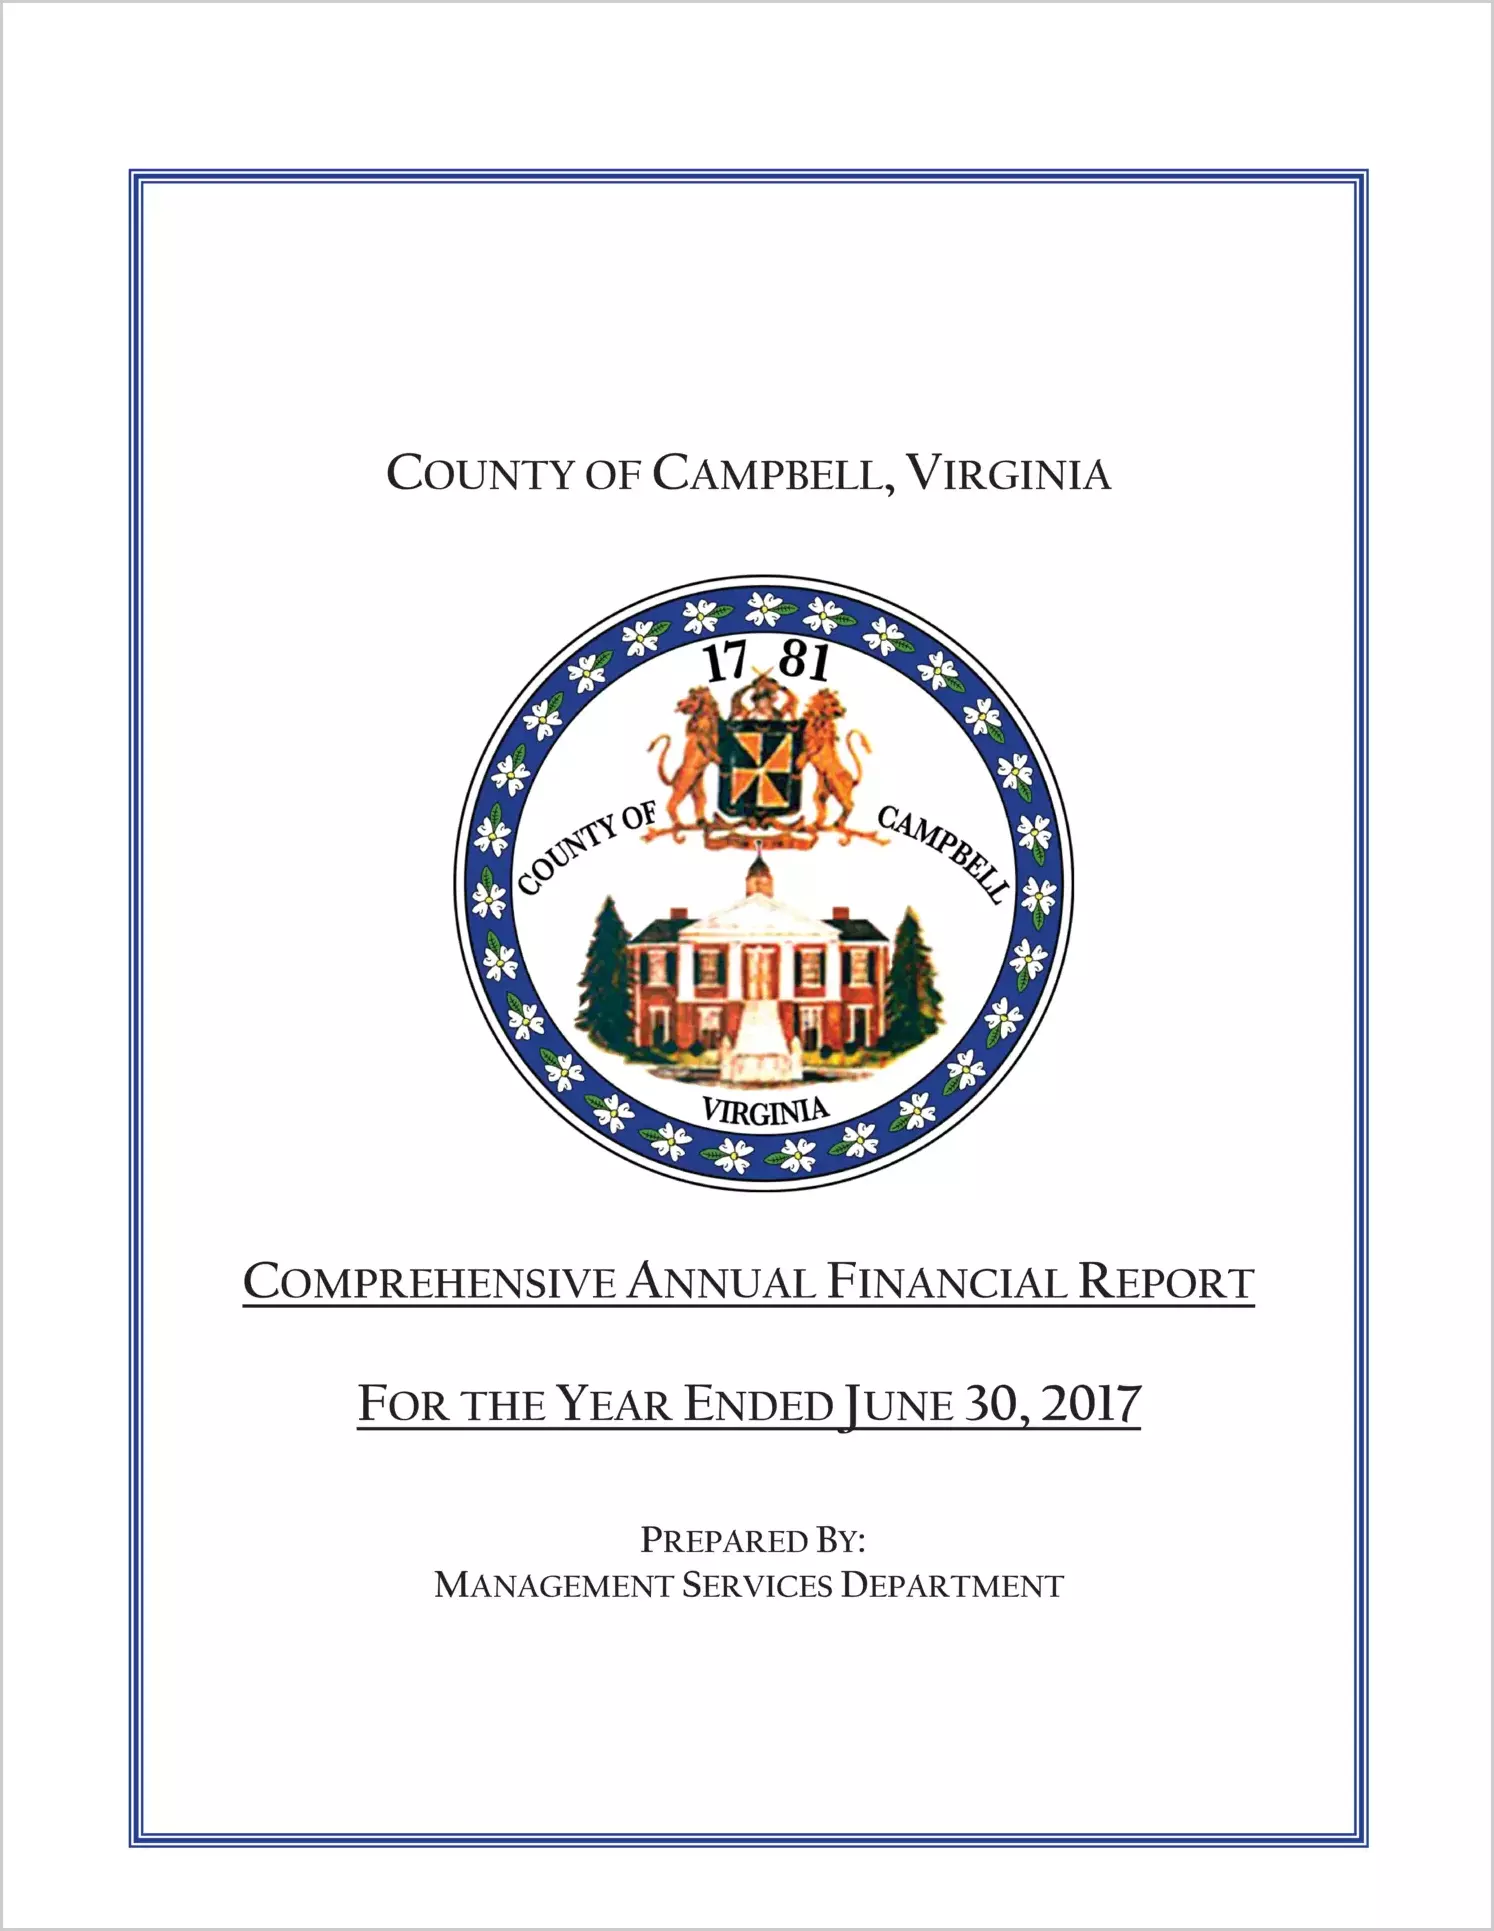 2017 Annual Financial Report for County of Campbell